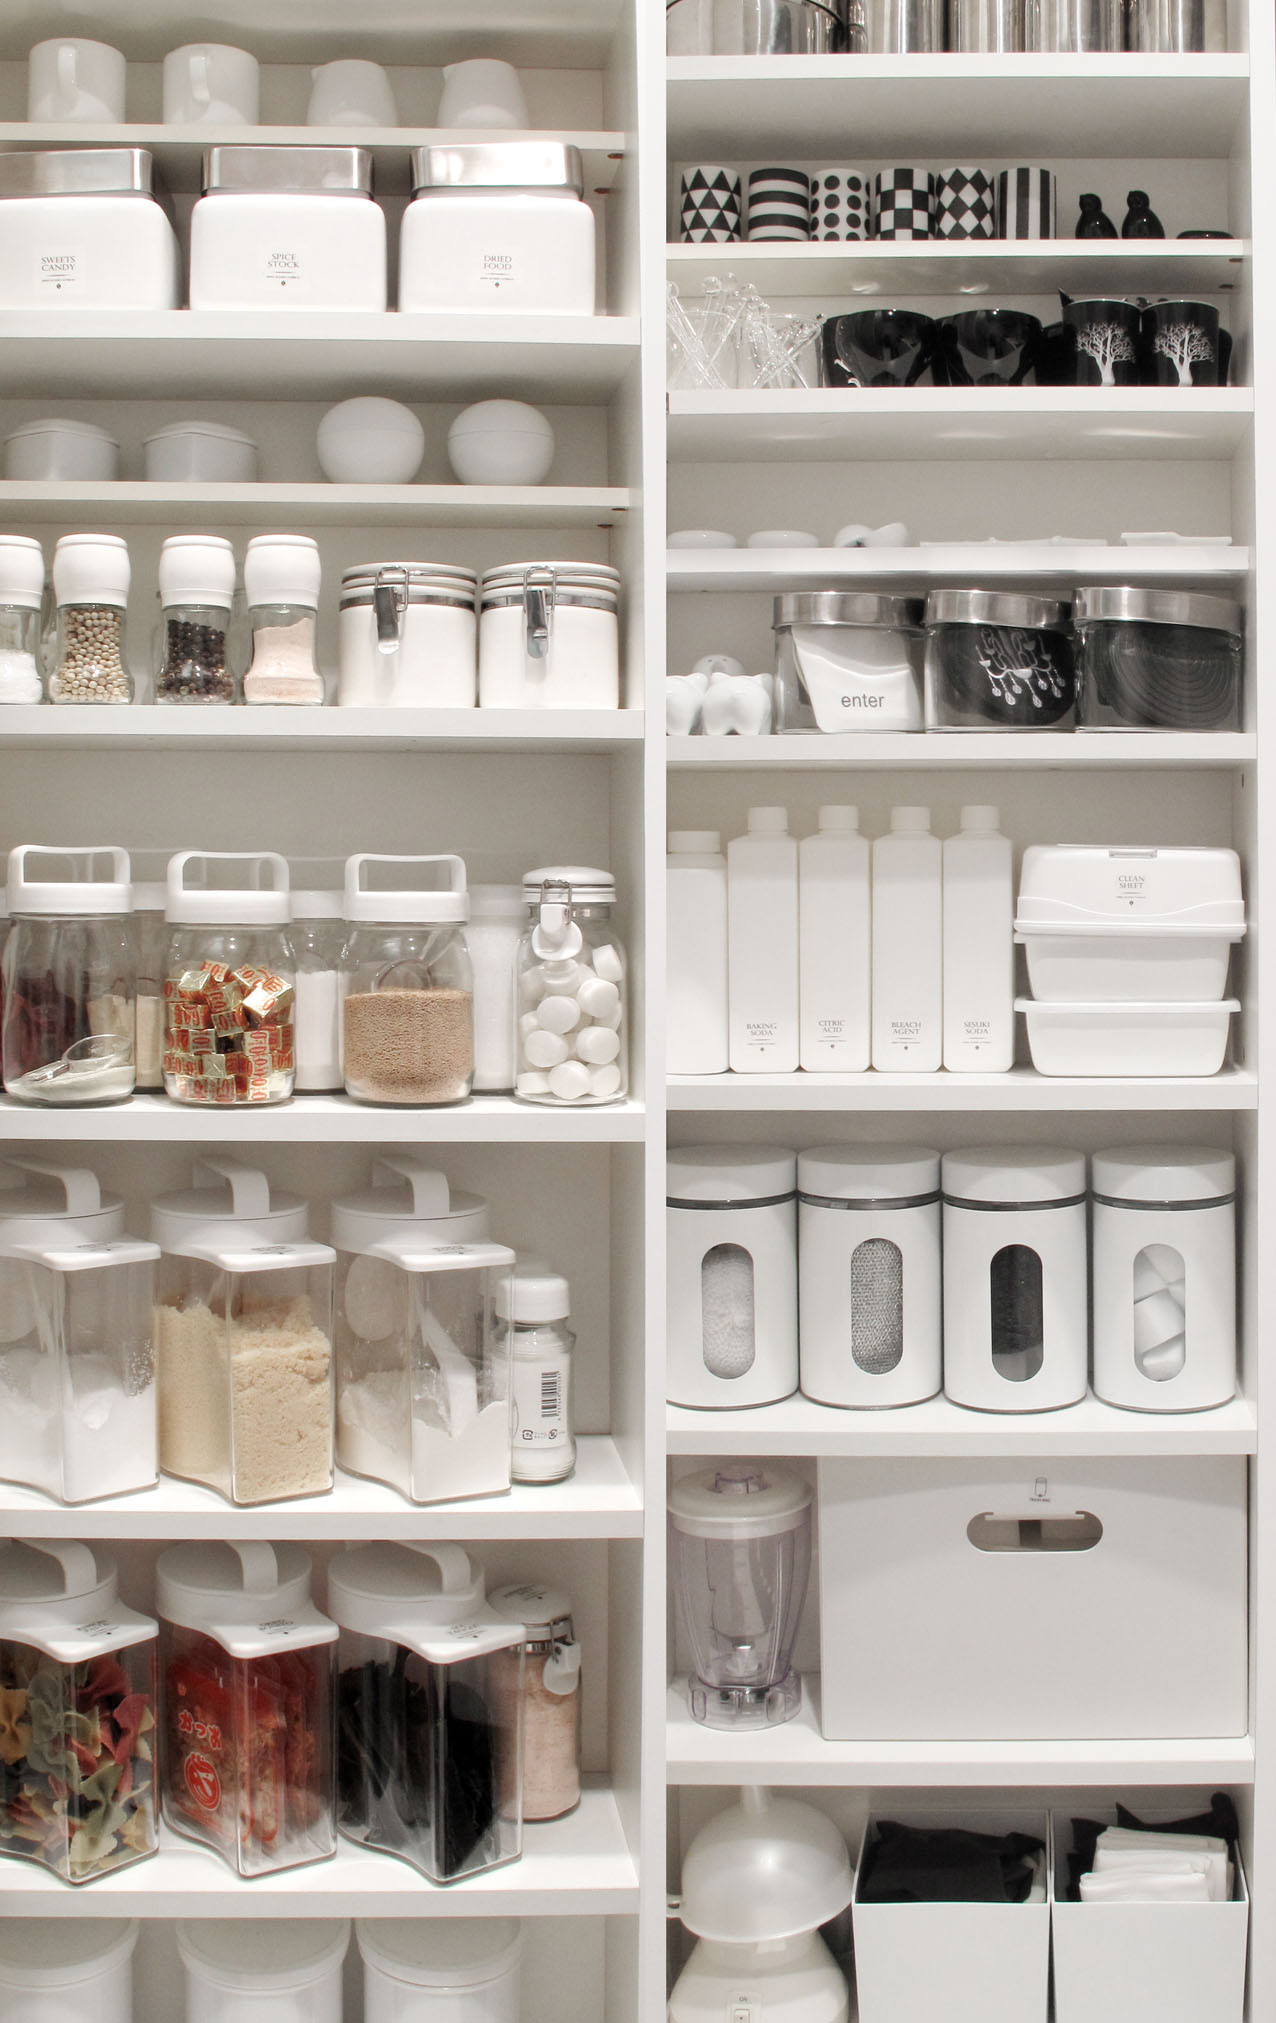 Kitchen Pantry Organize
 Tips for a Perfectly Organized Pantry